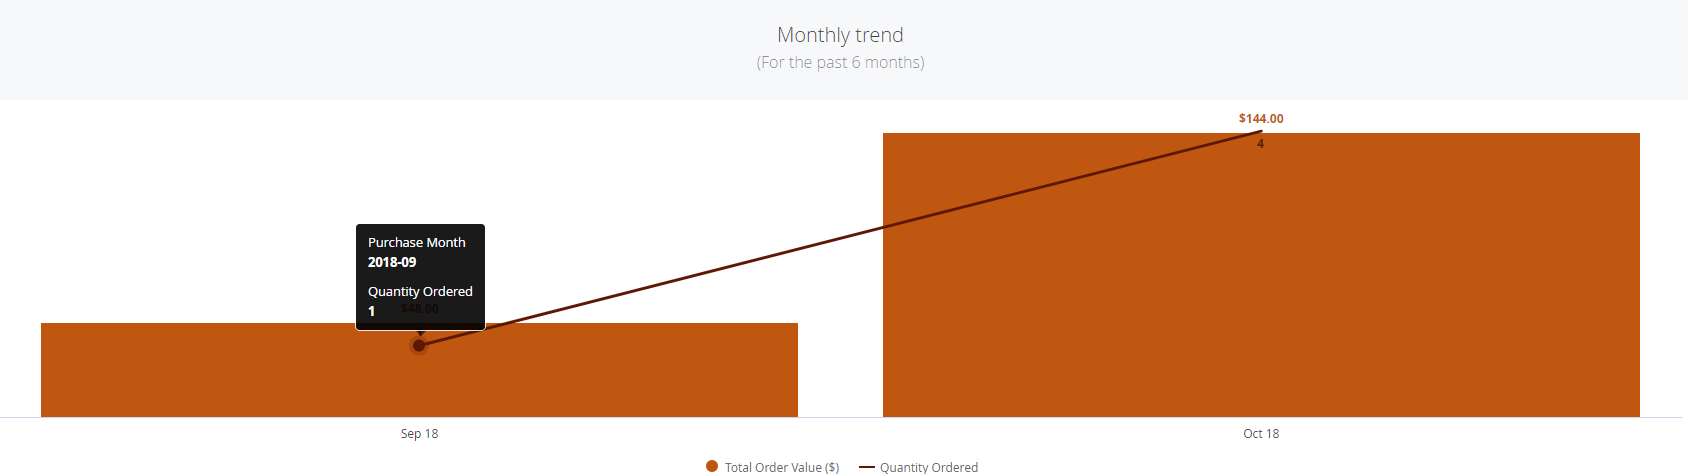 9_monthly_trend.PNG